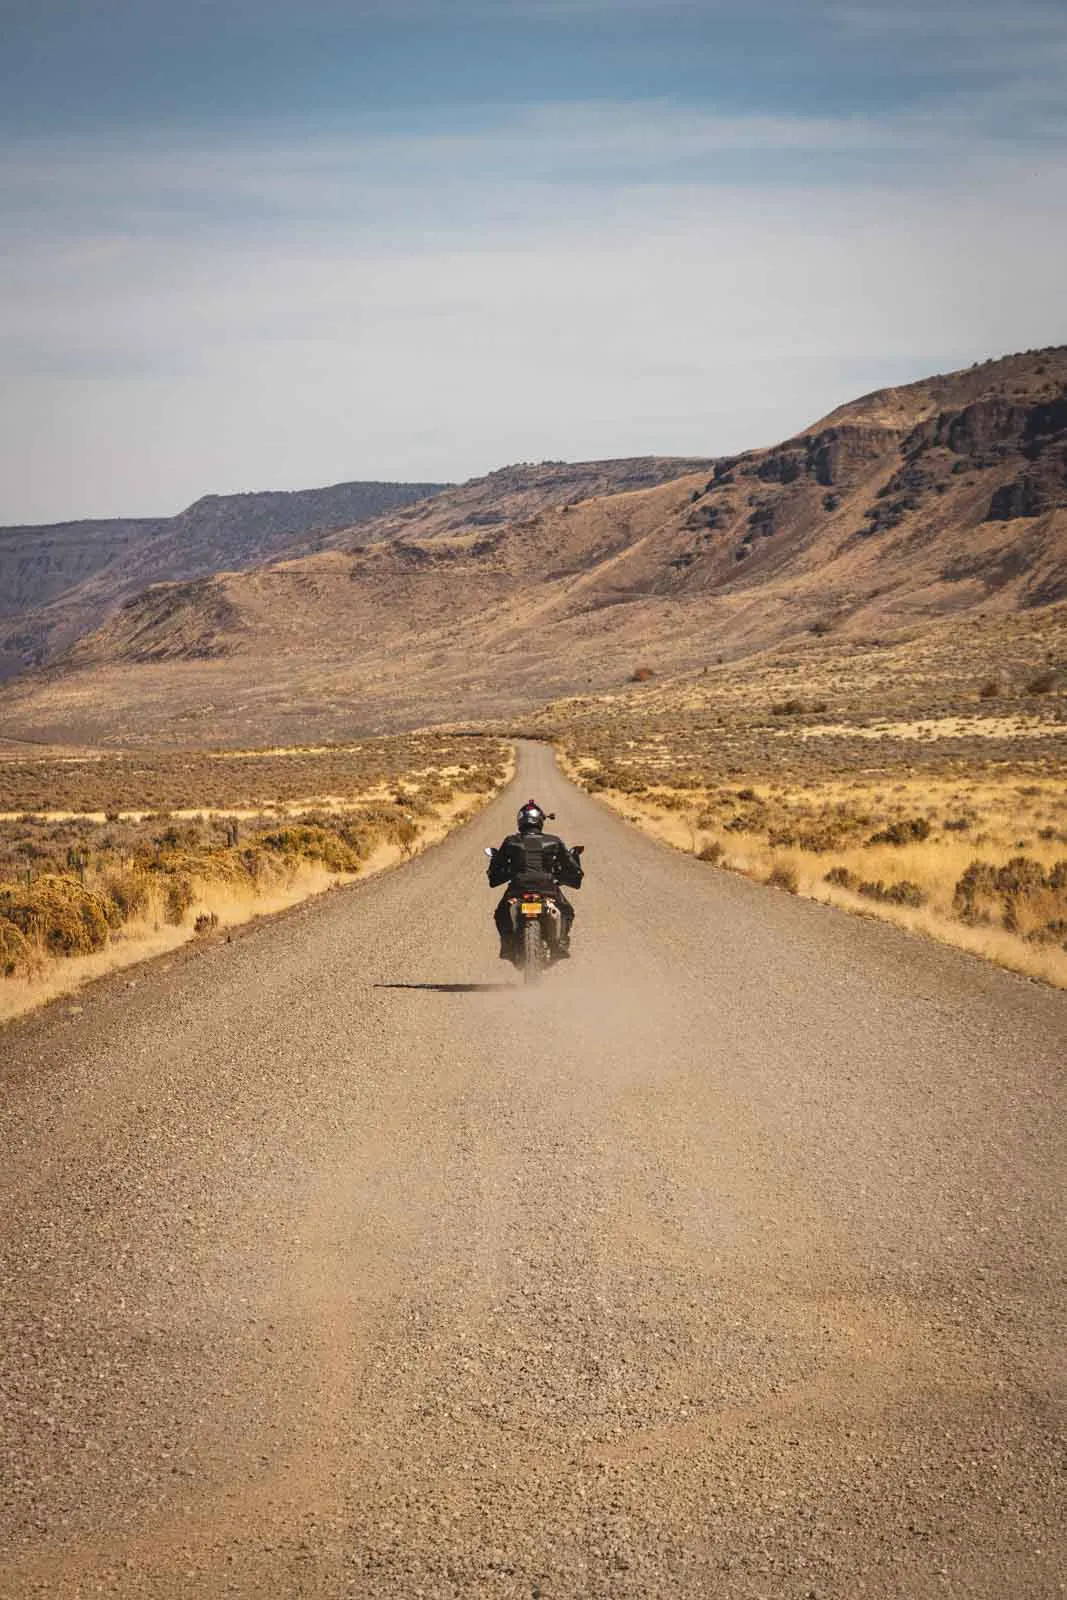 Motorcycling in Hart Mountain National Antelope Refuge is another fun thing to do on your Oregon road trip.